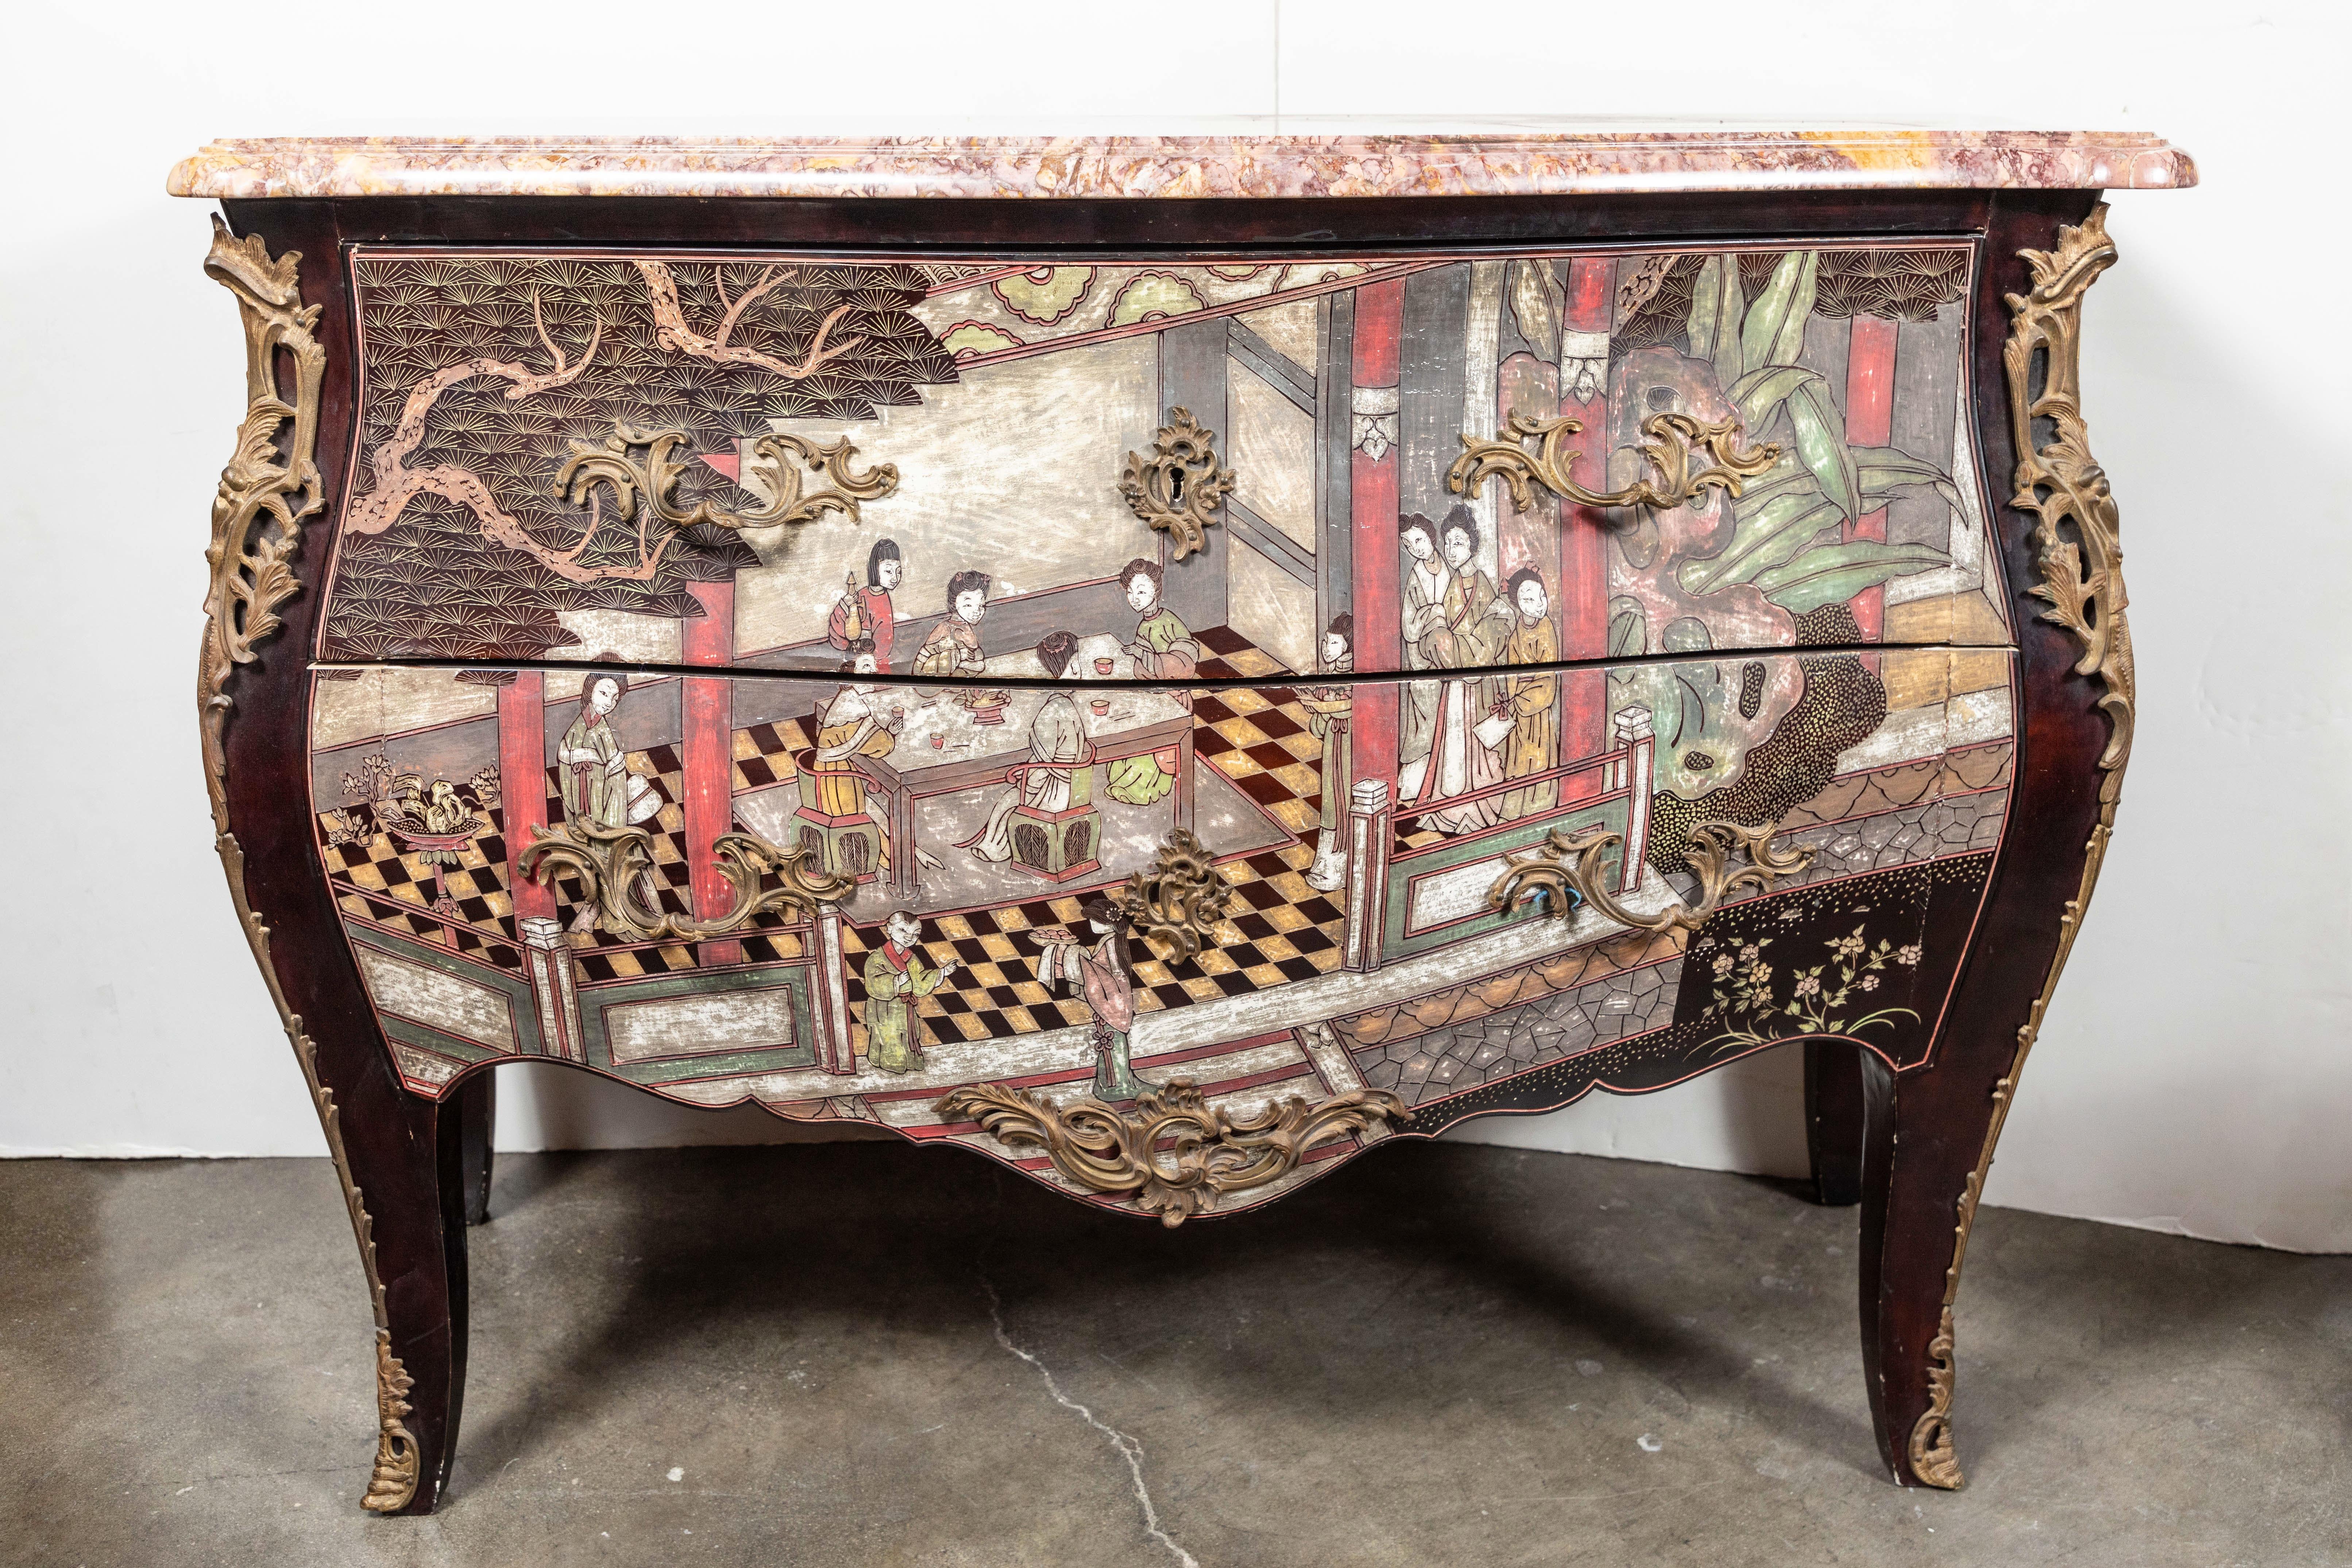 Absolutely charming, two-drawer, bombe-form, midcentury, Coromandel style, Chinoiserie commode in black lacquer, featuring a colorful scene of figures in an interior. Embellished with gilt bronze mounts, escutcheons, and drawer pulls. Surmounted by